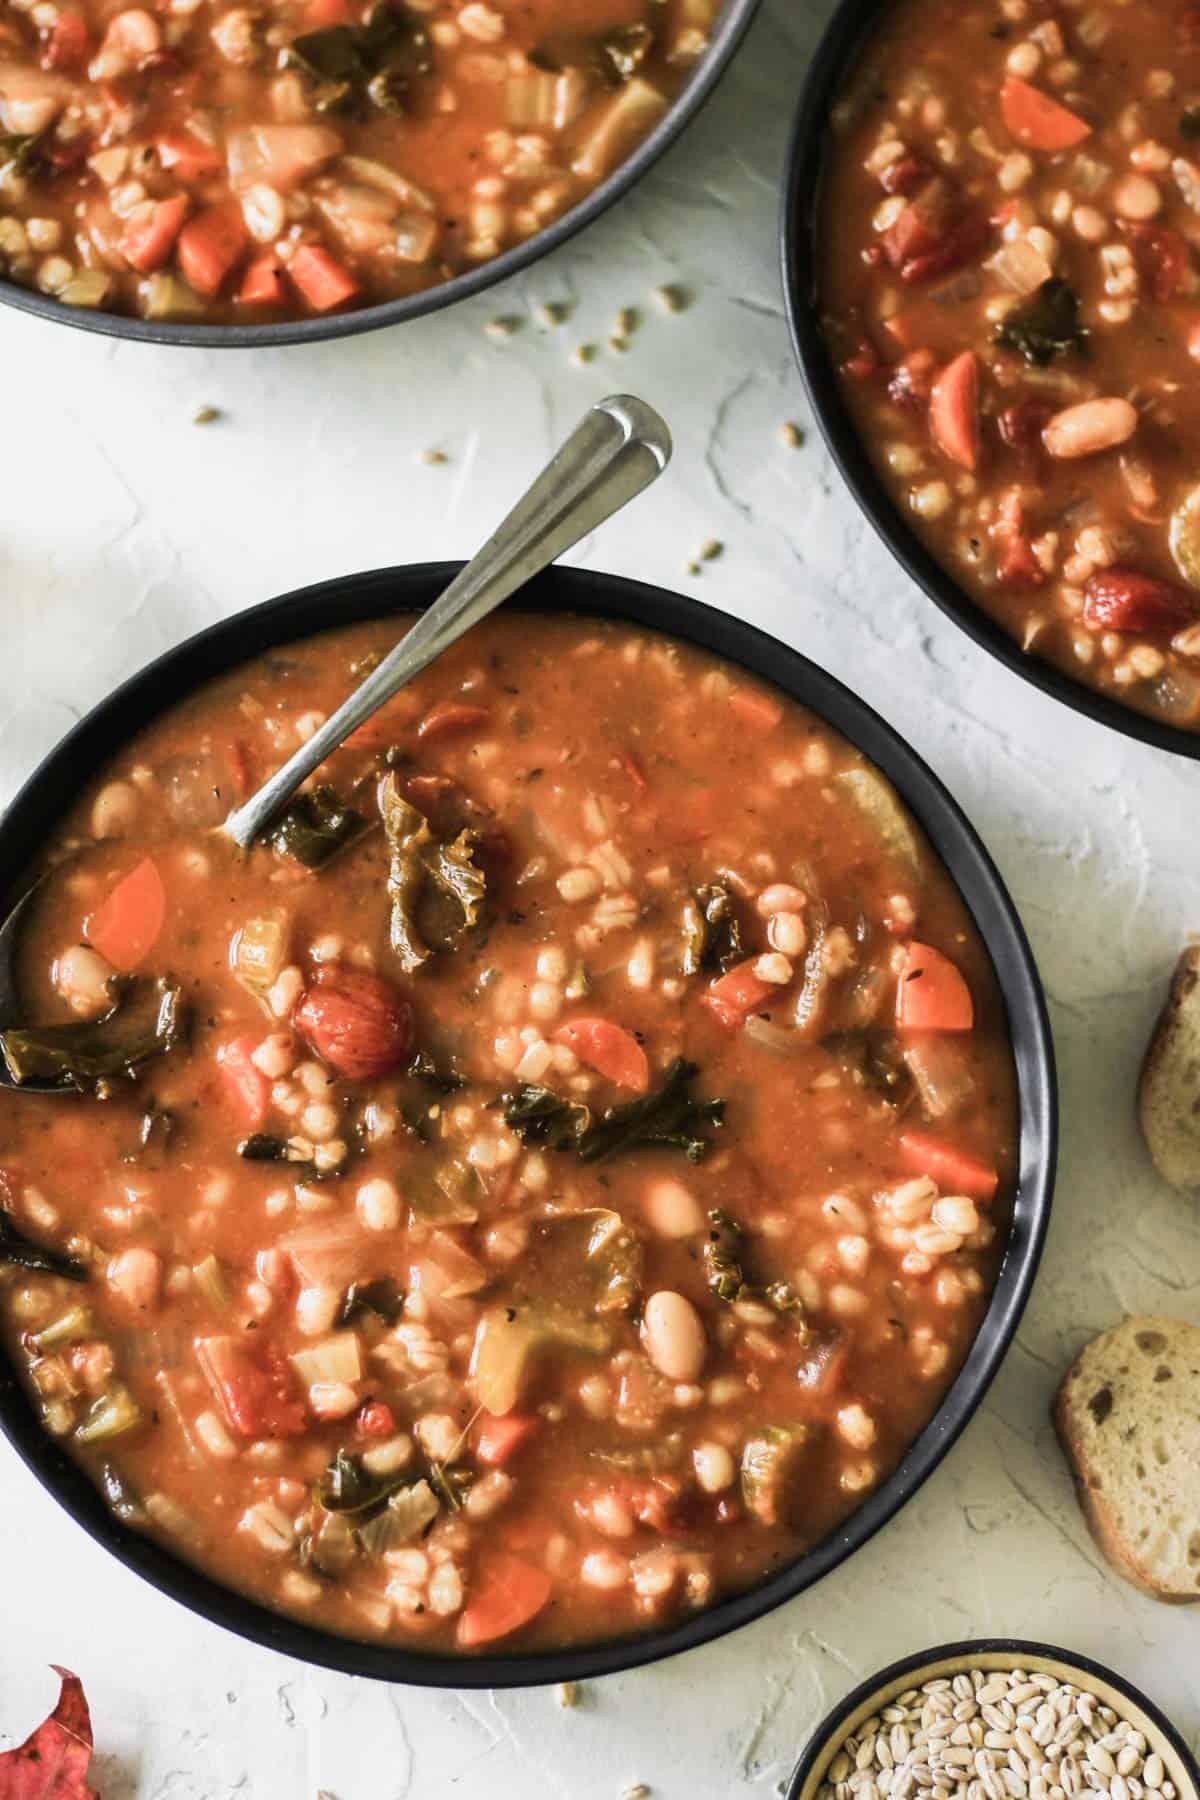 Vegetable, bean, and barley soup in a black bowl with a spoon and side of crusty bread.